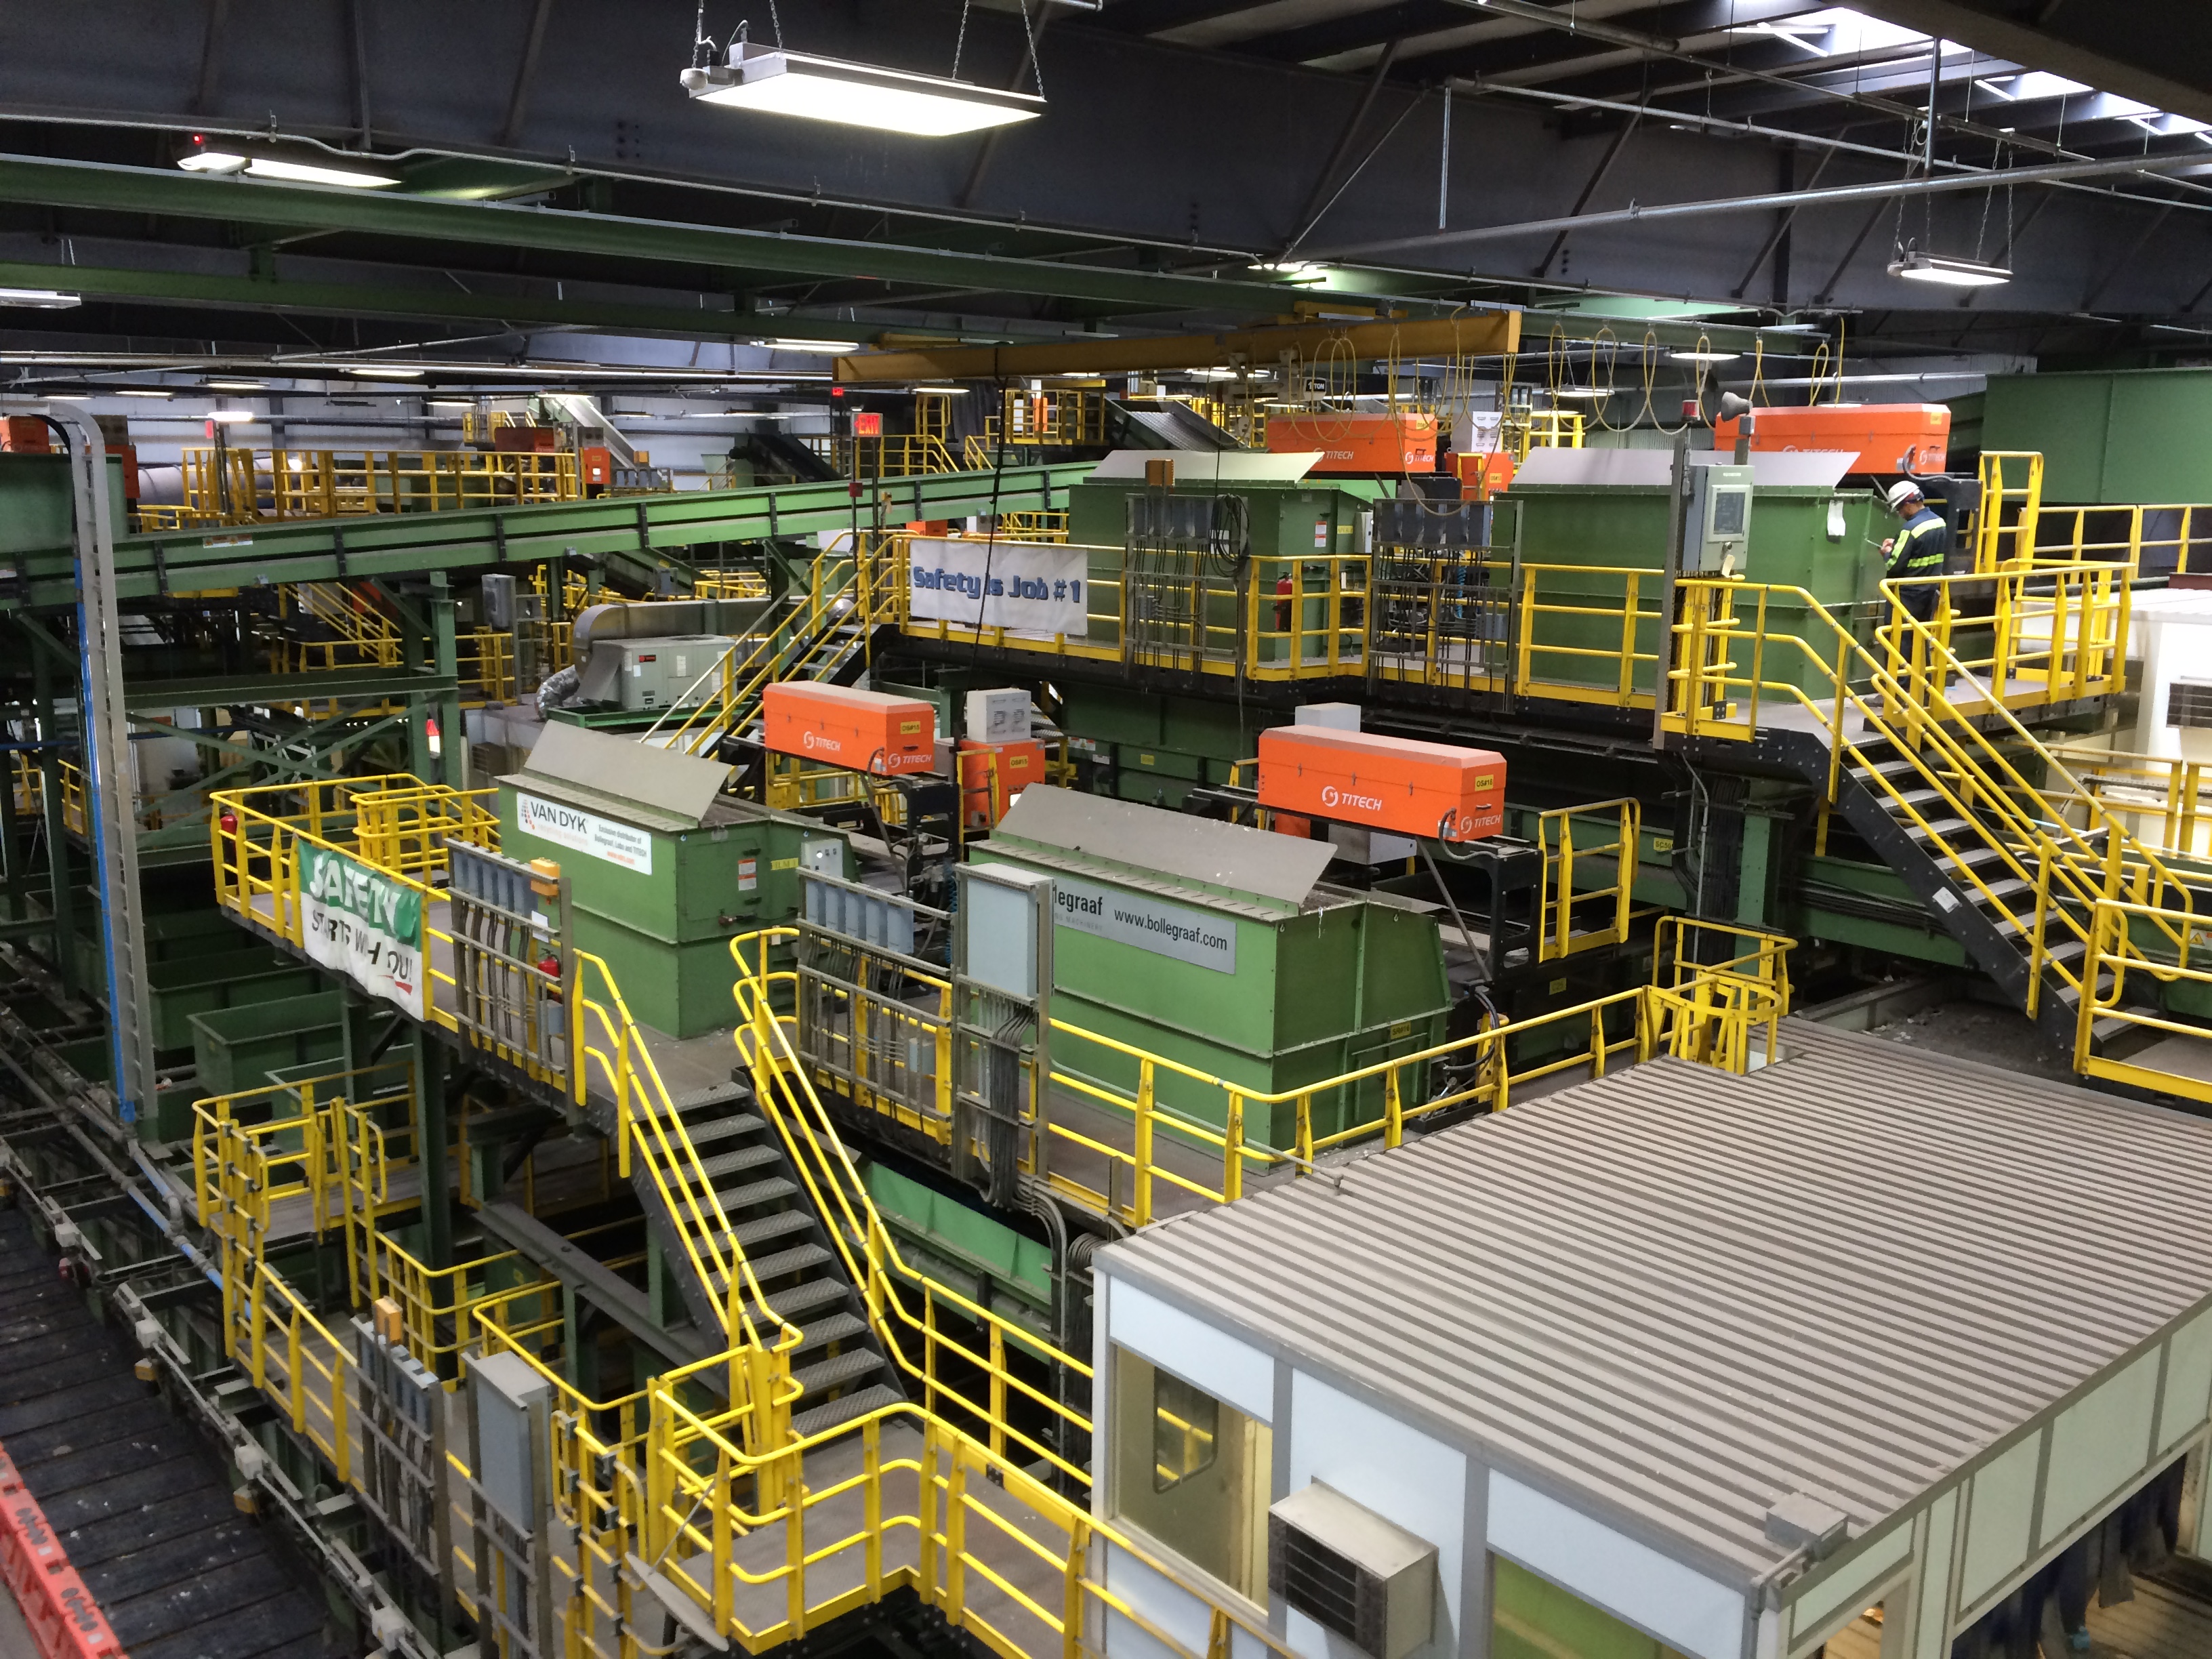 Inside recycling facility showing green machinery on multiple levels inside a large warehouse building.